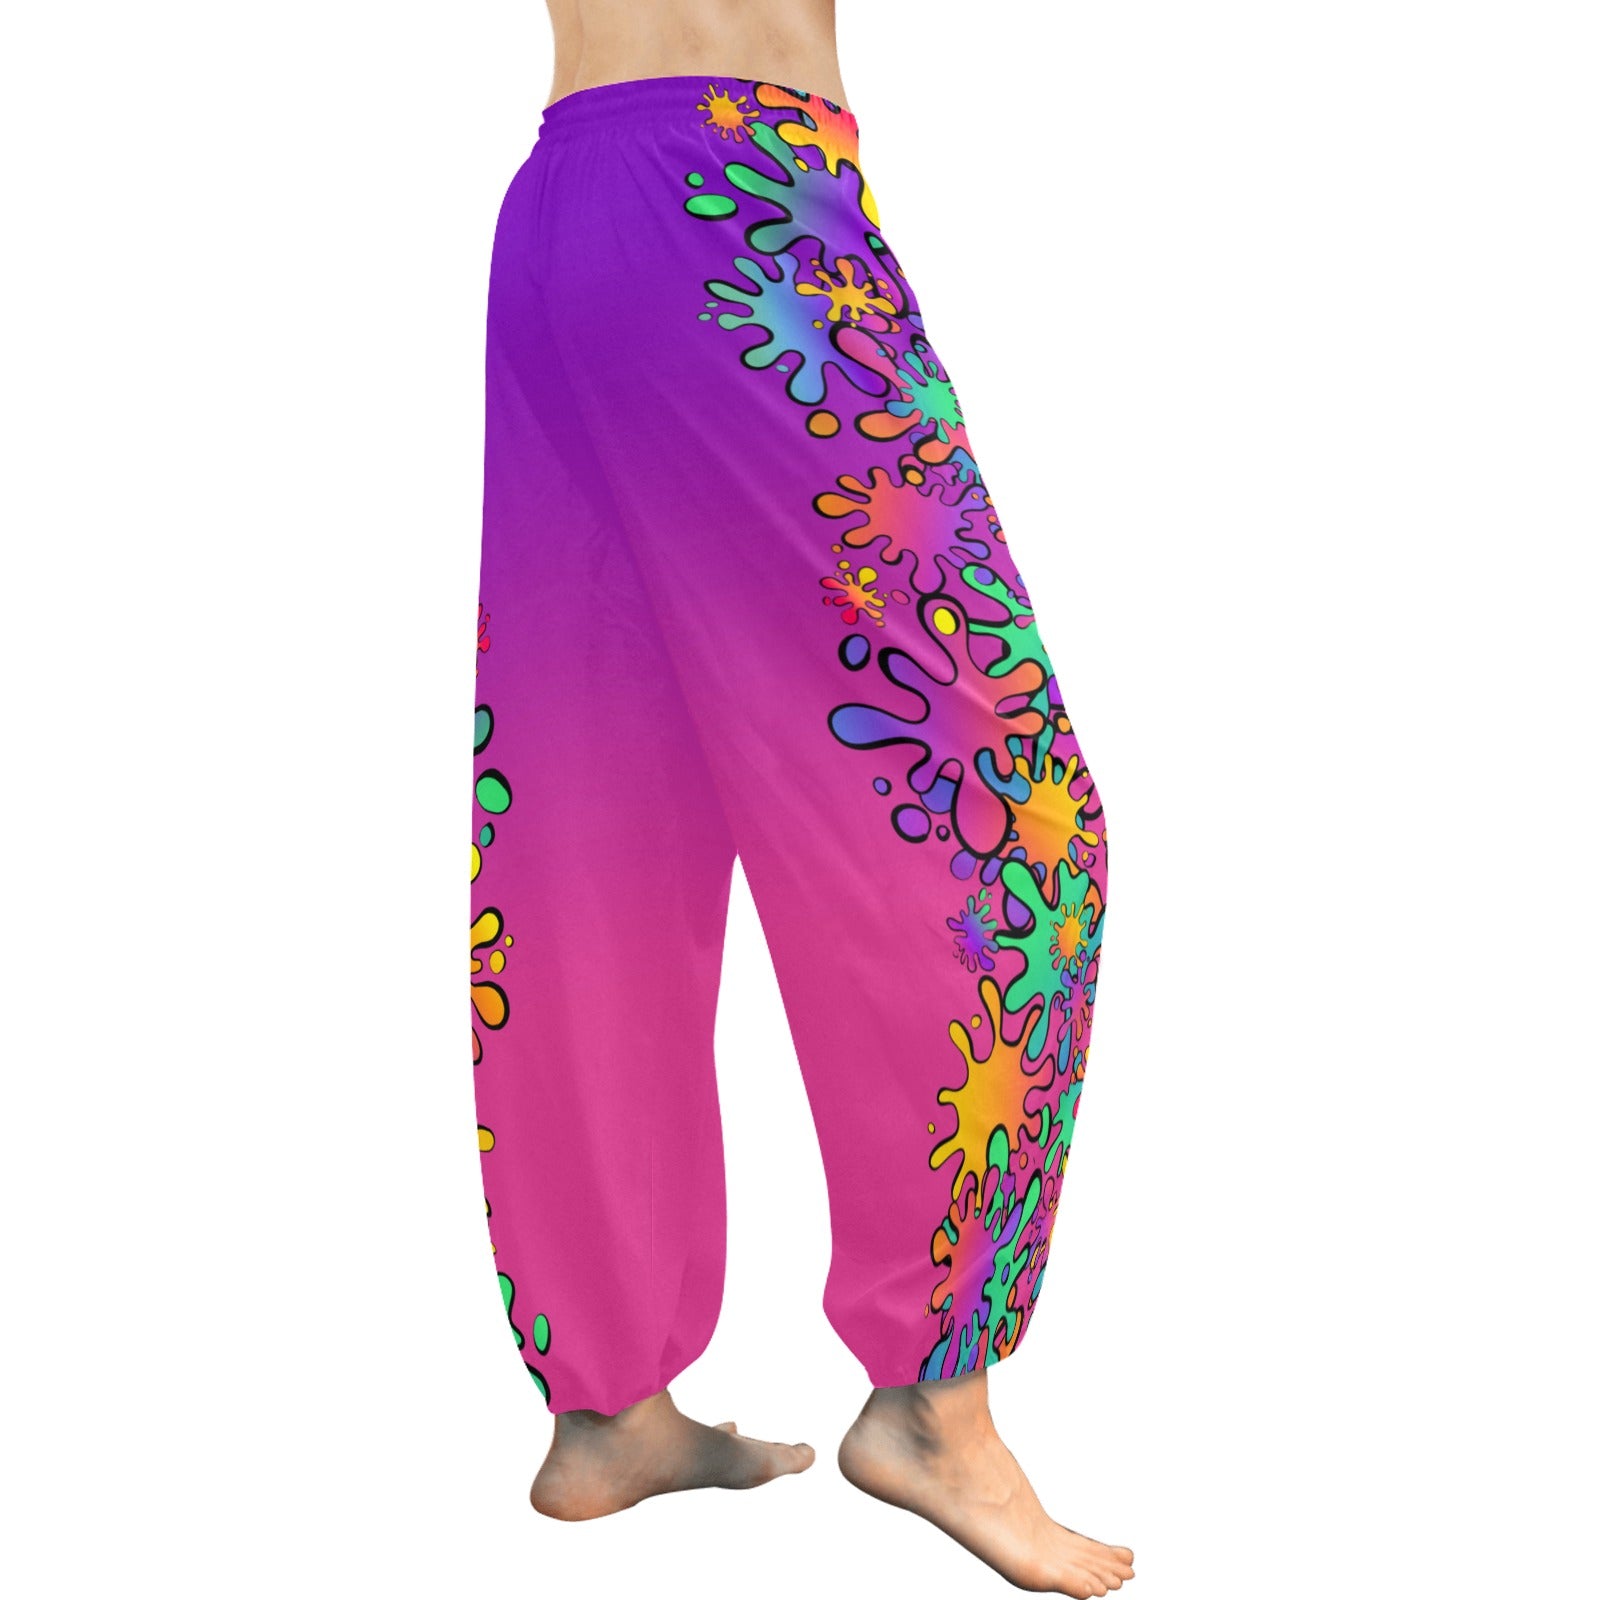 Harem Pants for Face Painters and Artists